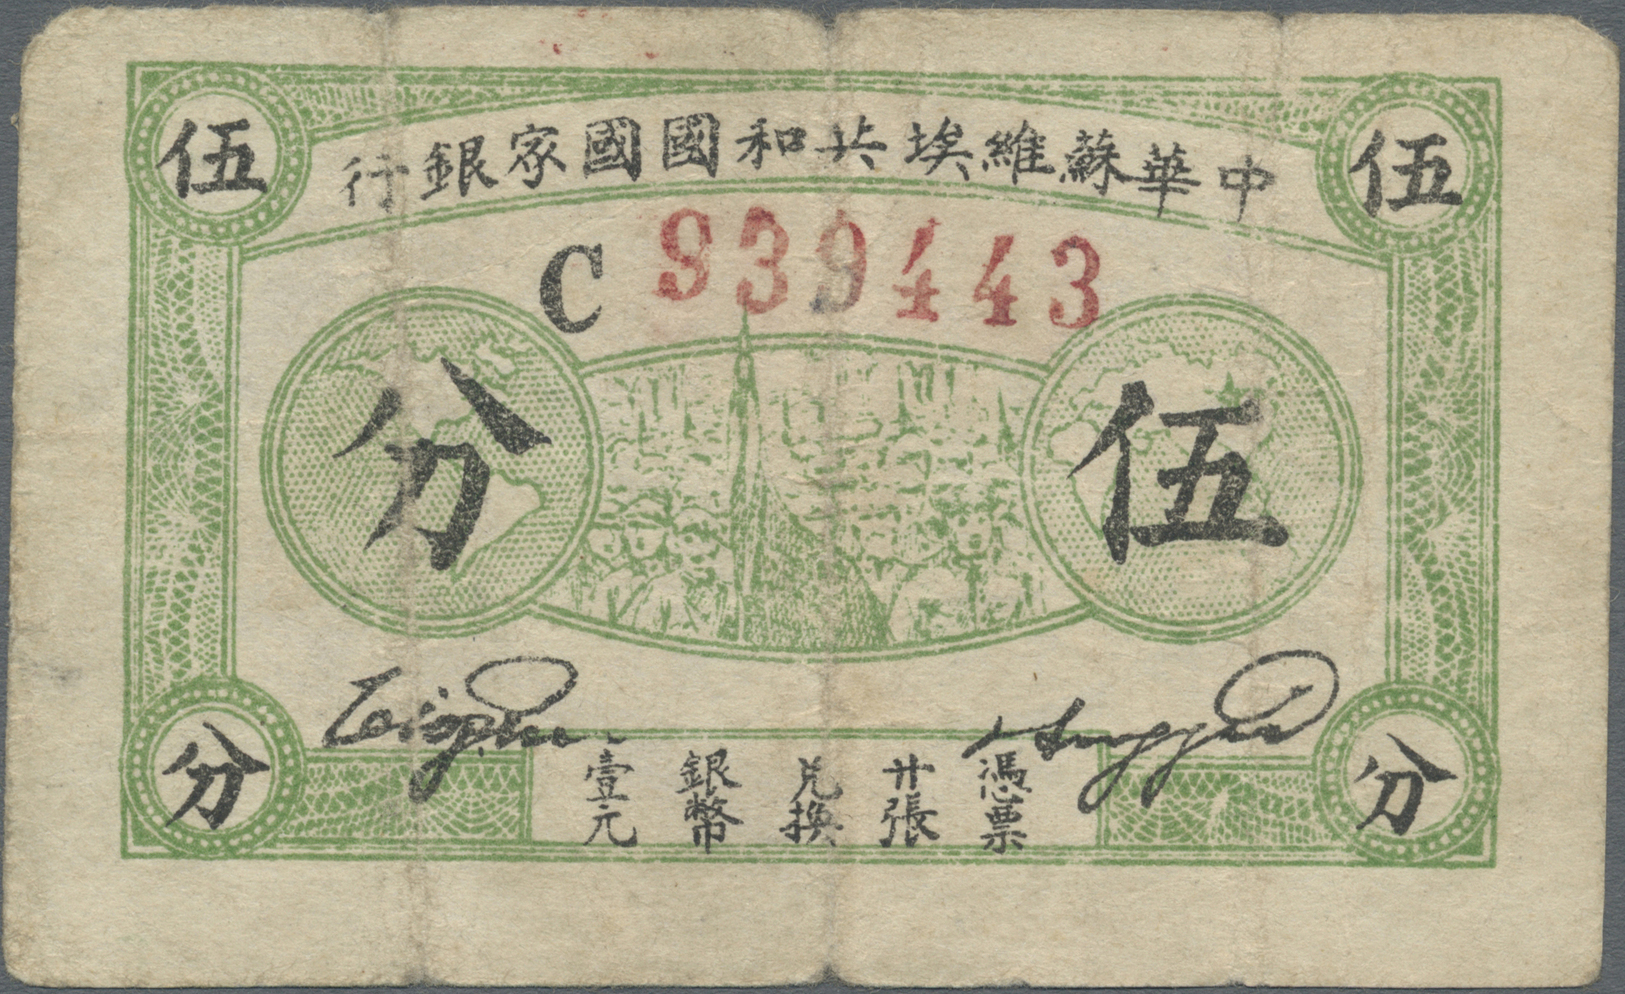 00561 China: 5 Fen 1932 P. S3250, Used With Stronger Center Fold, Usual Traces Of Usage, Condition: F. - China